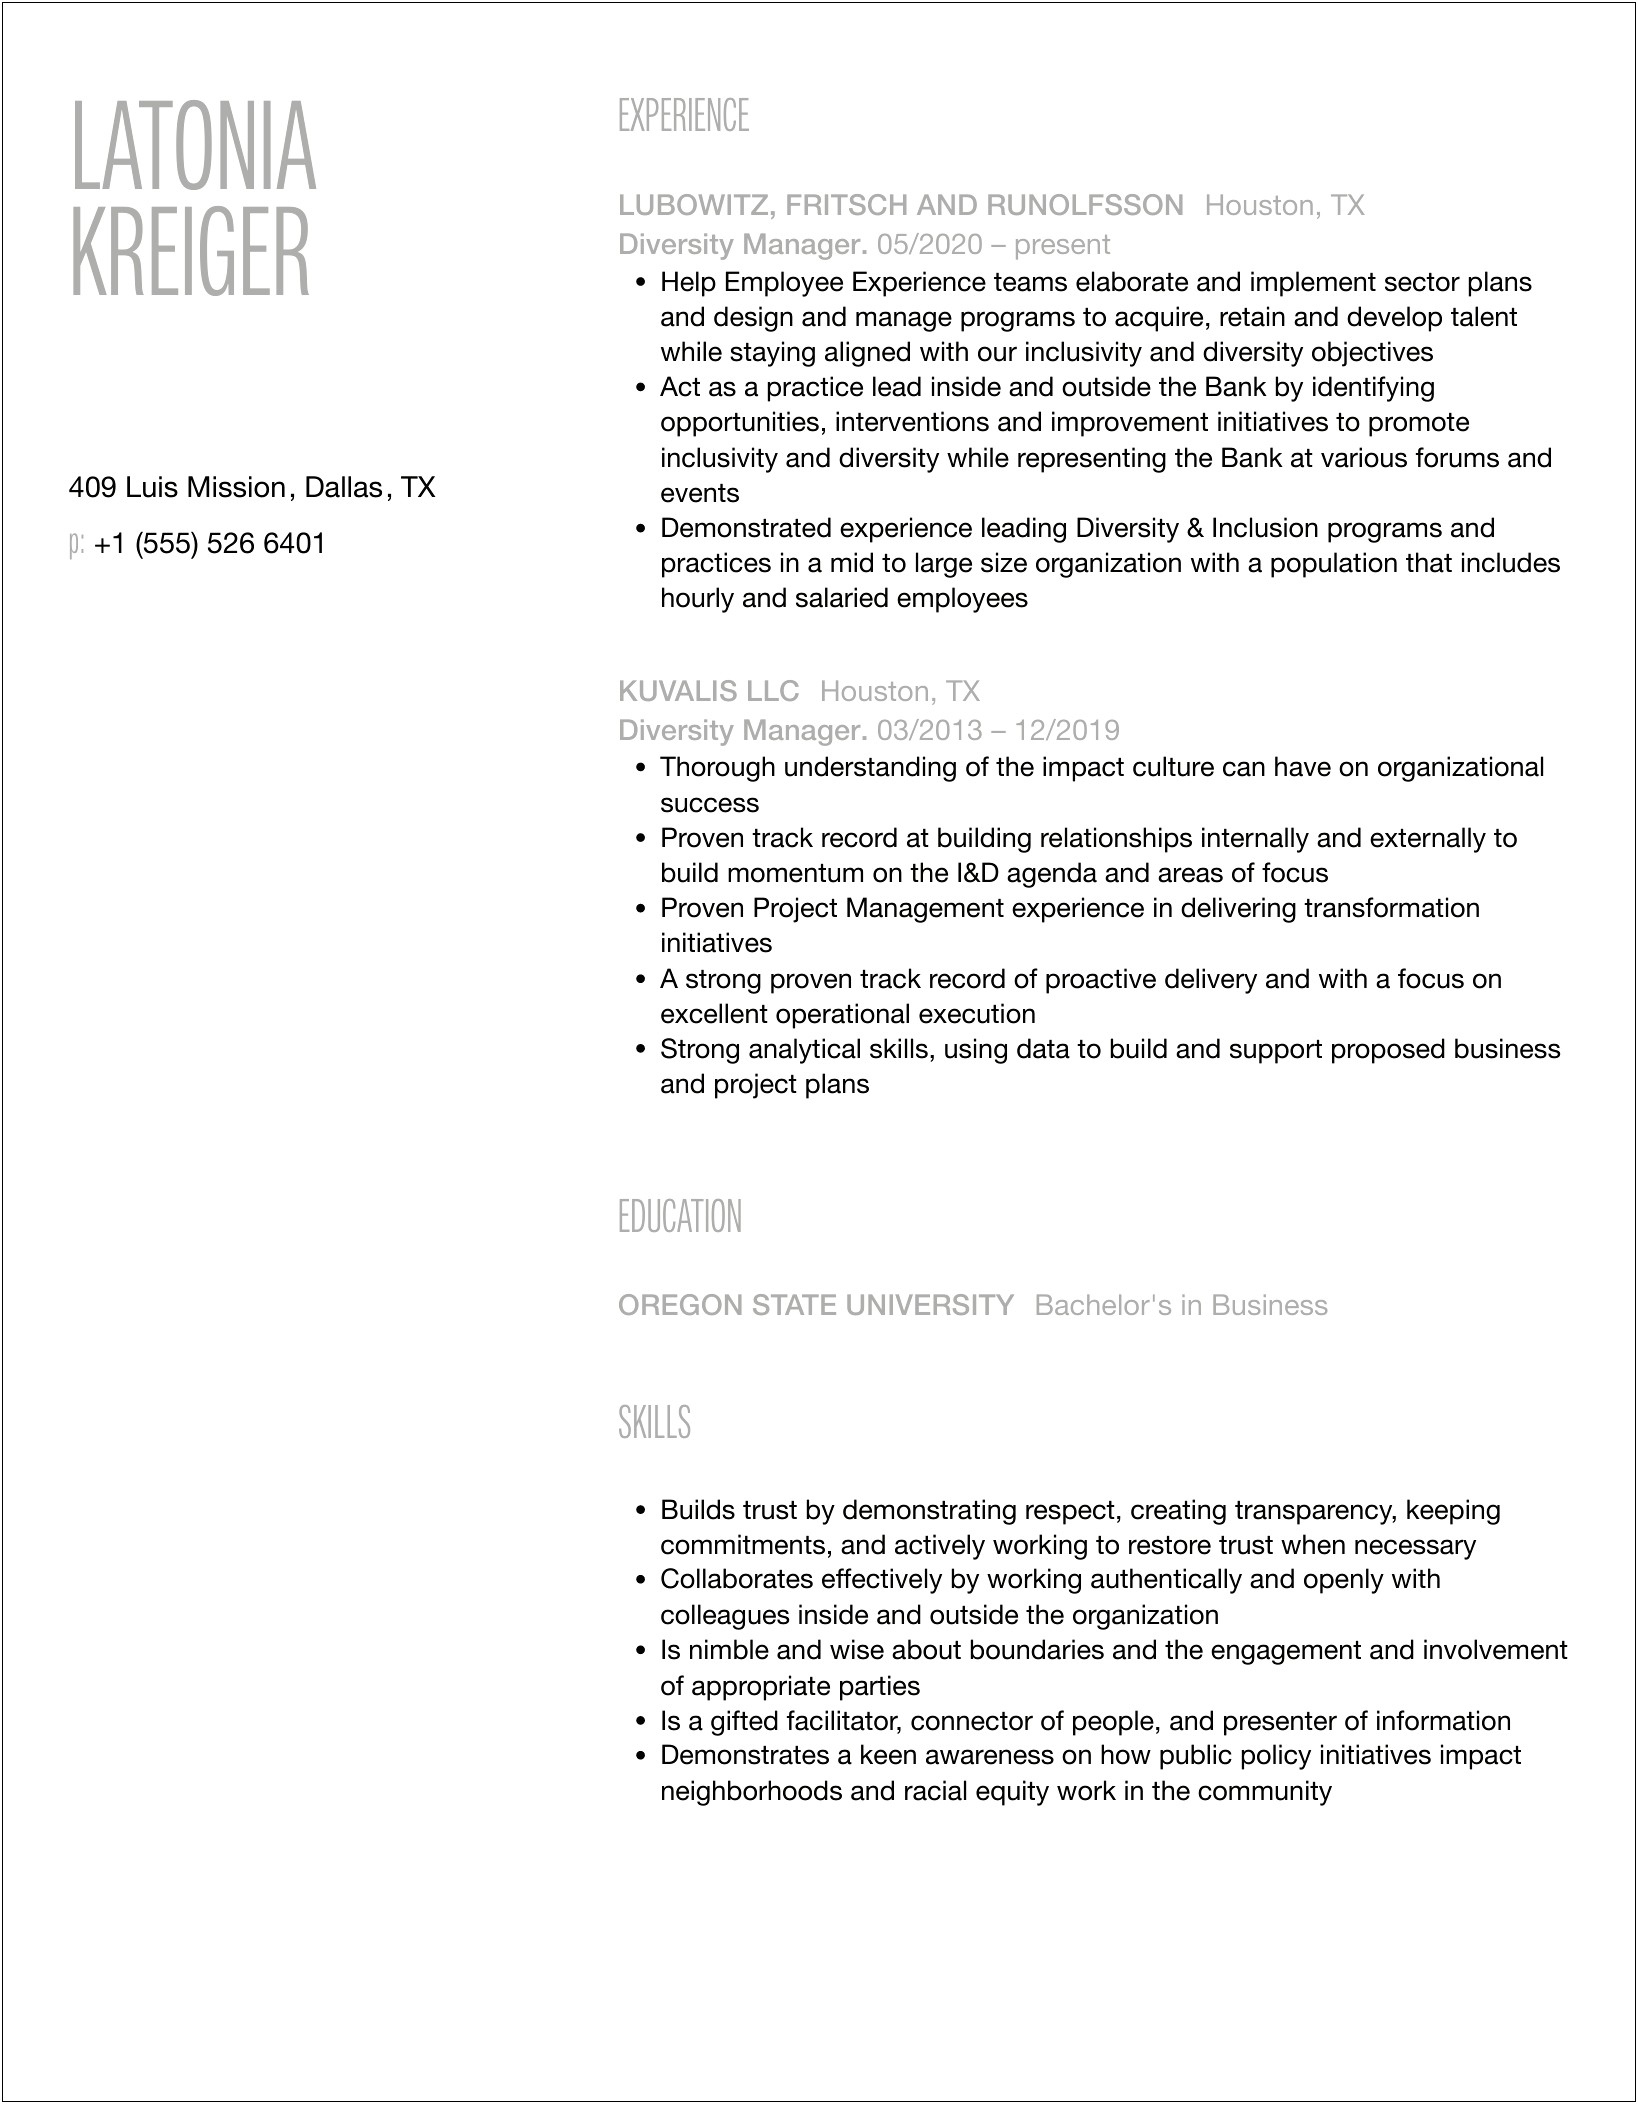 Working In A Diverse Environment Resume